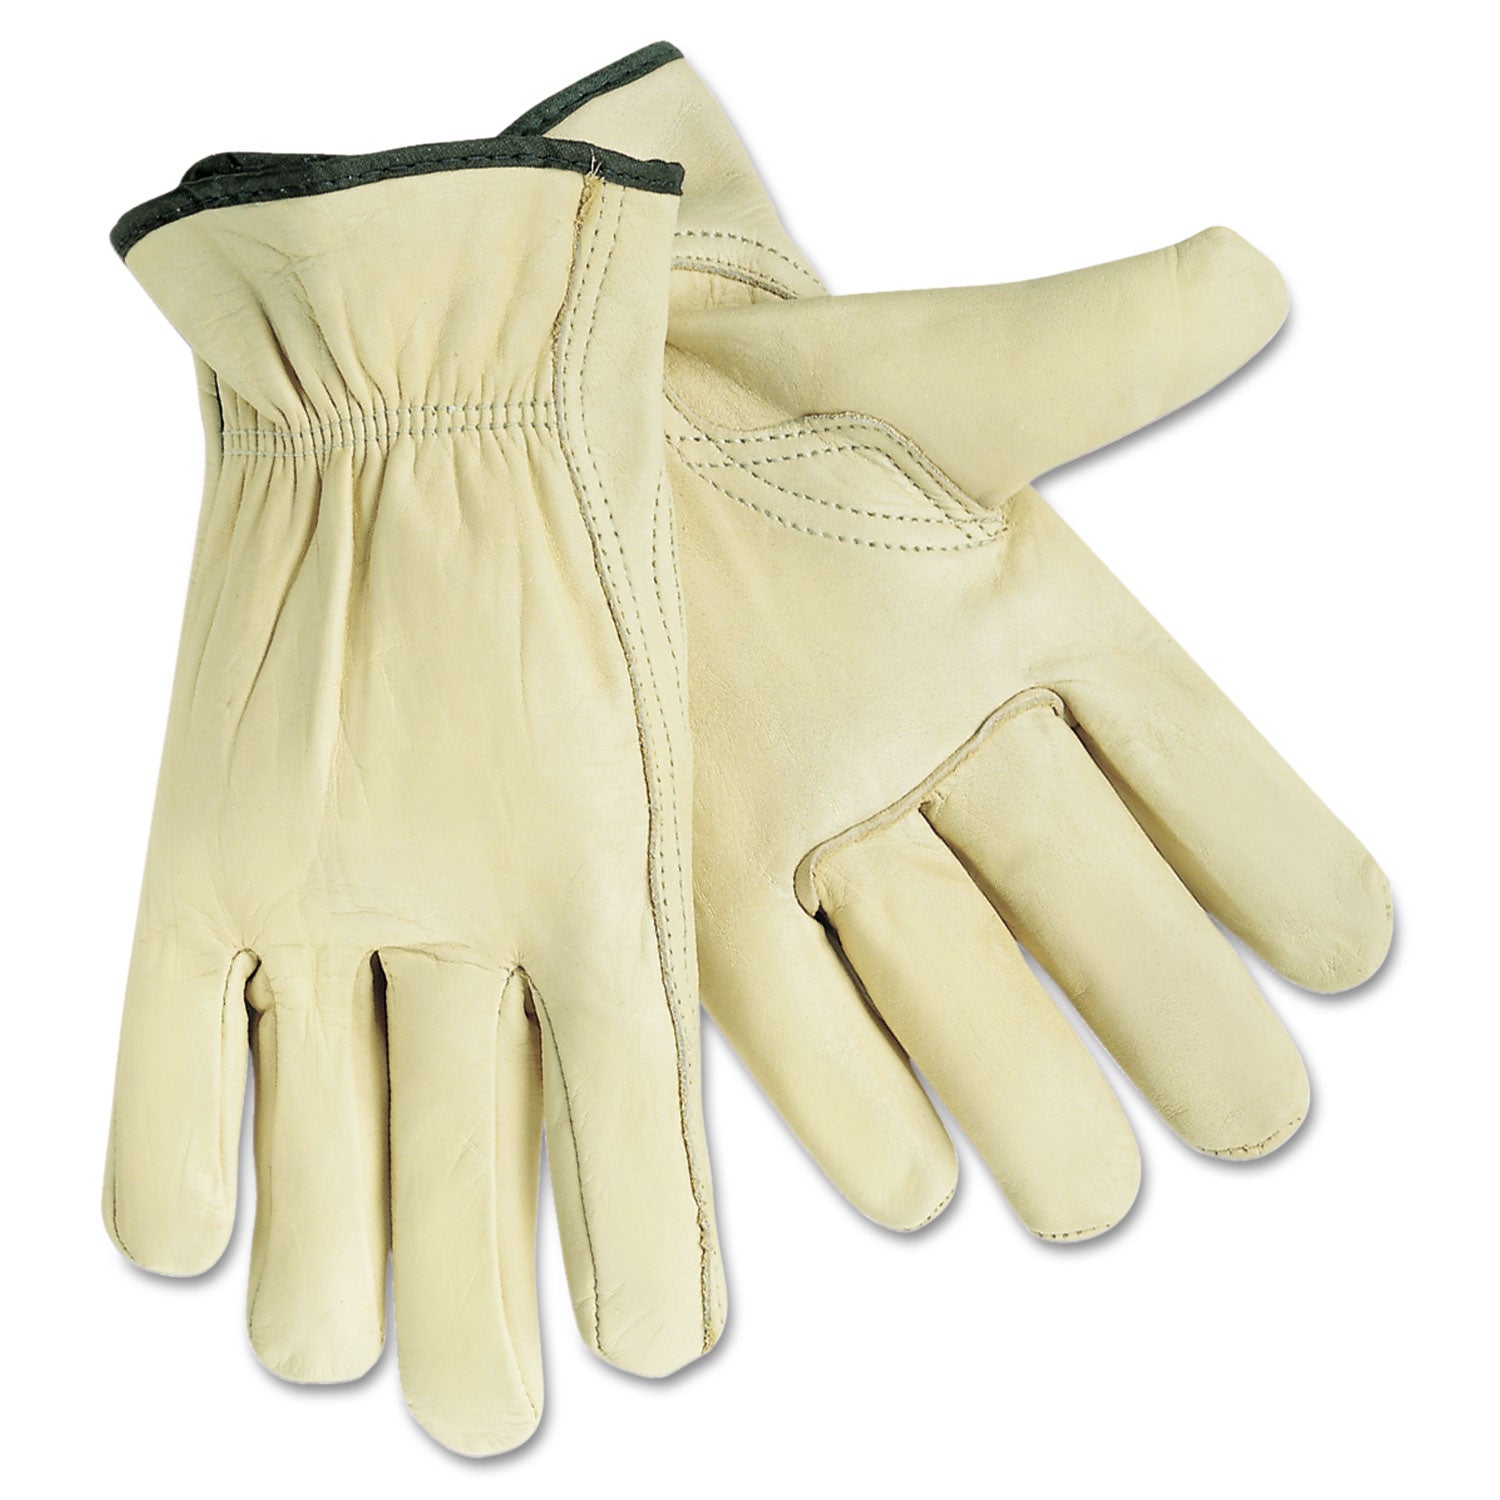 Full Leather Cow Grain Gloves, X-Large, 1 Pair - 